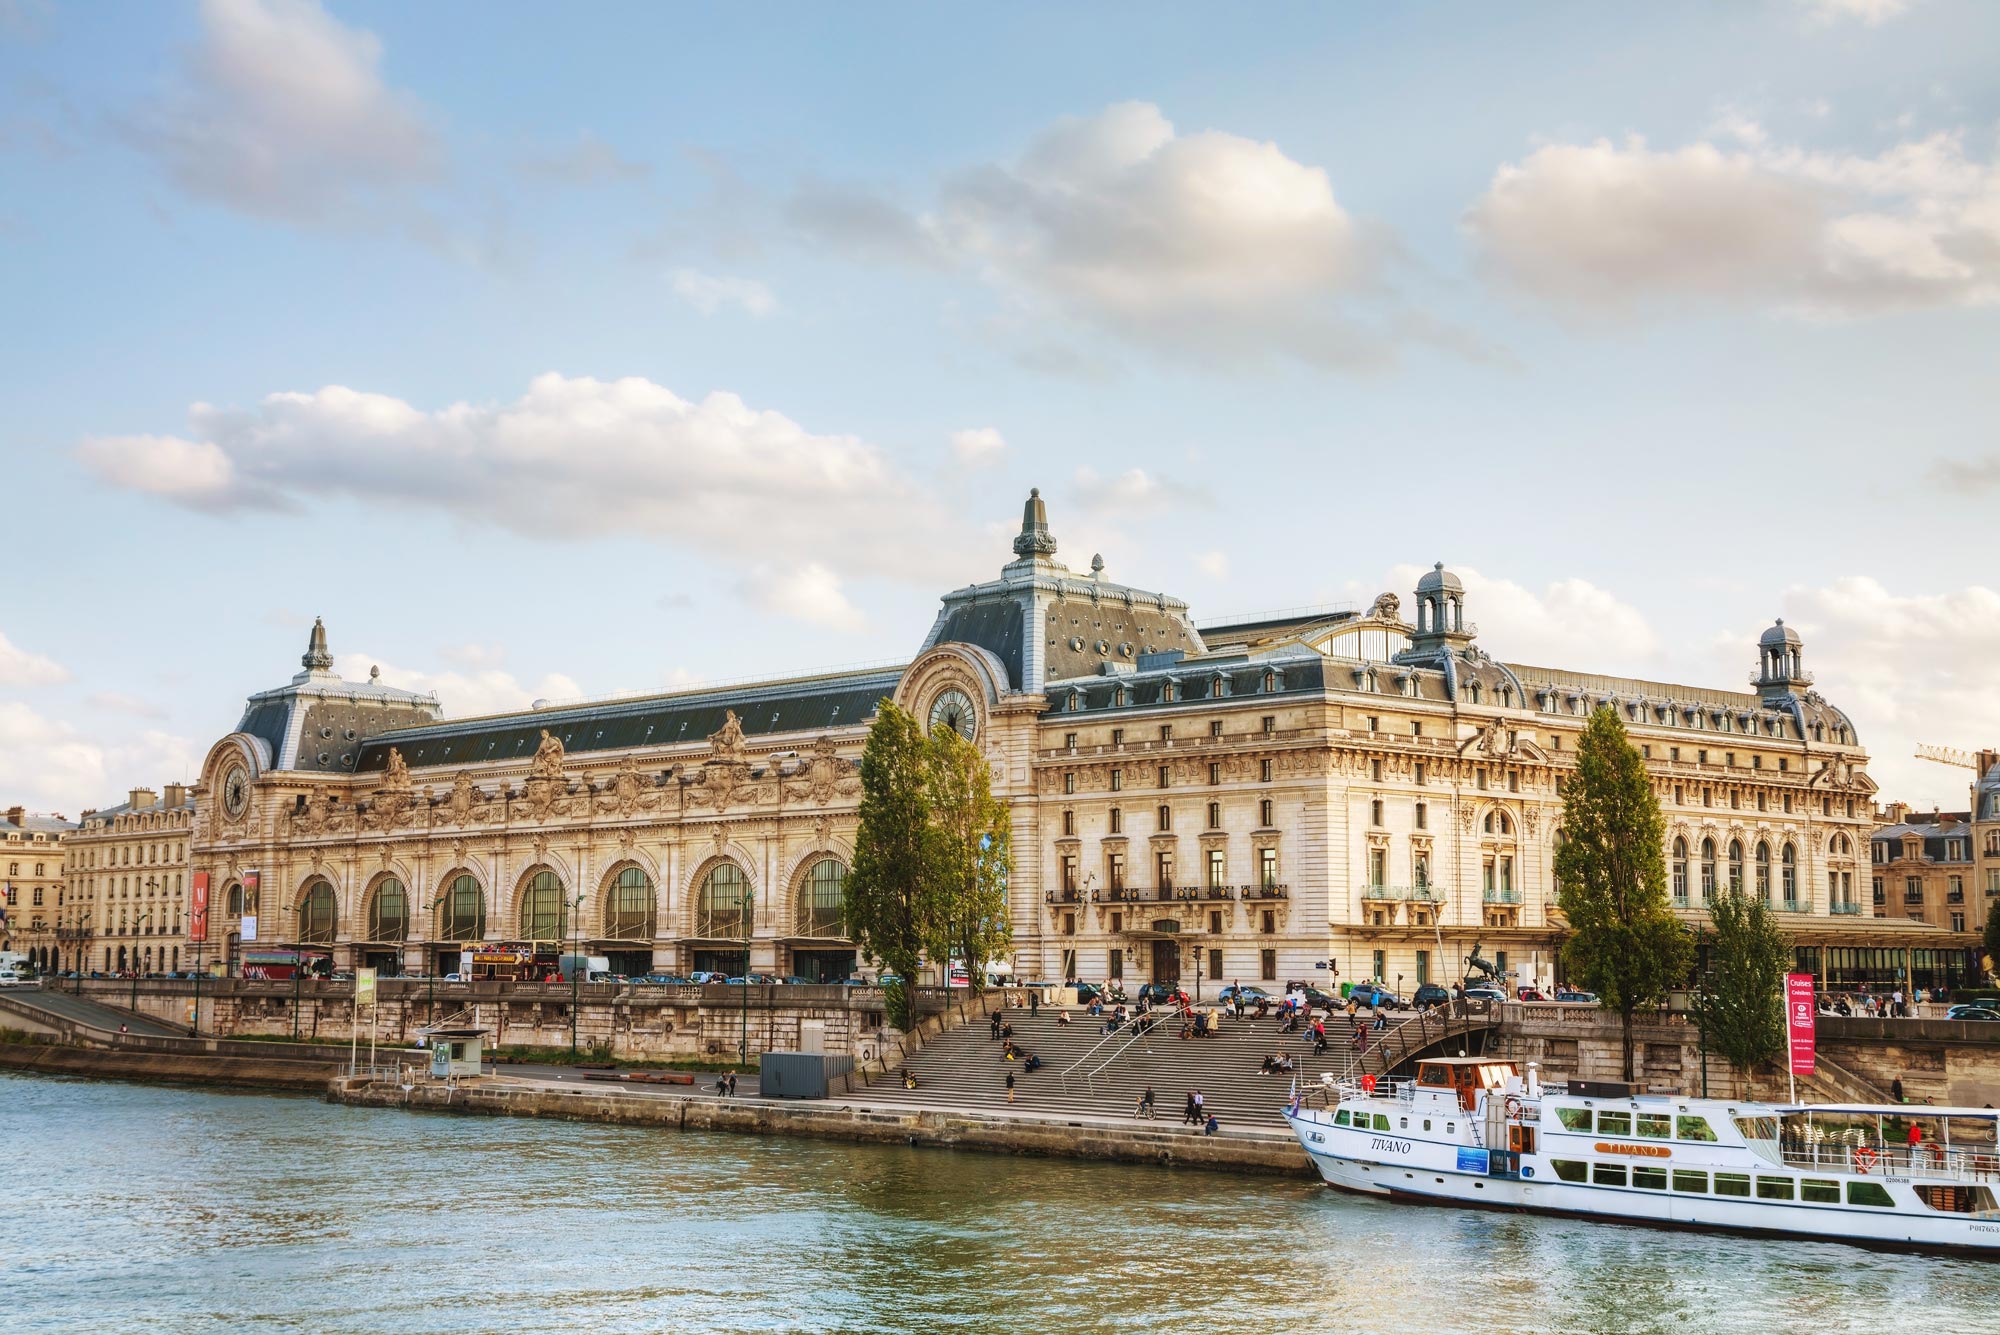 A photo of the D'Orsay museum in Paris